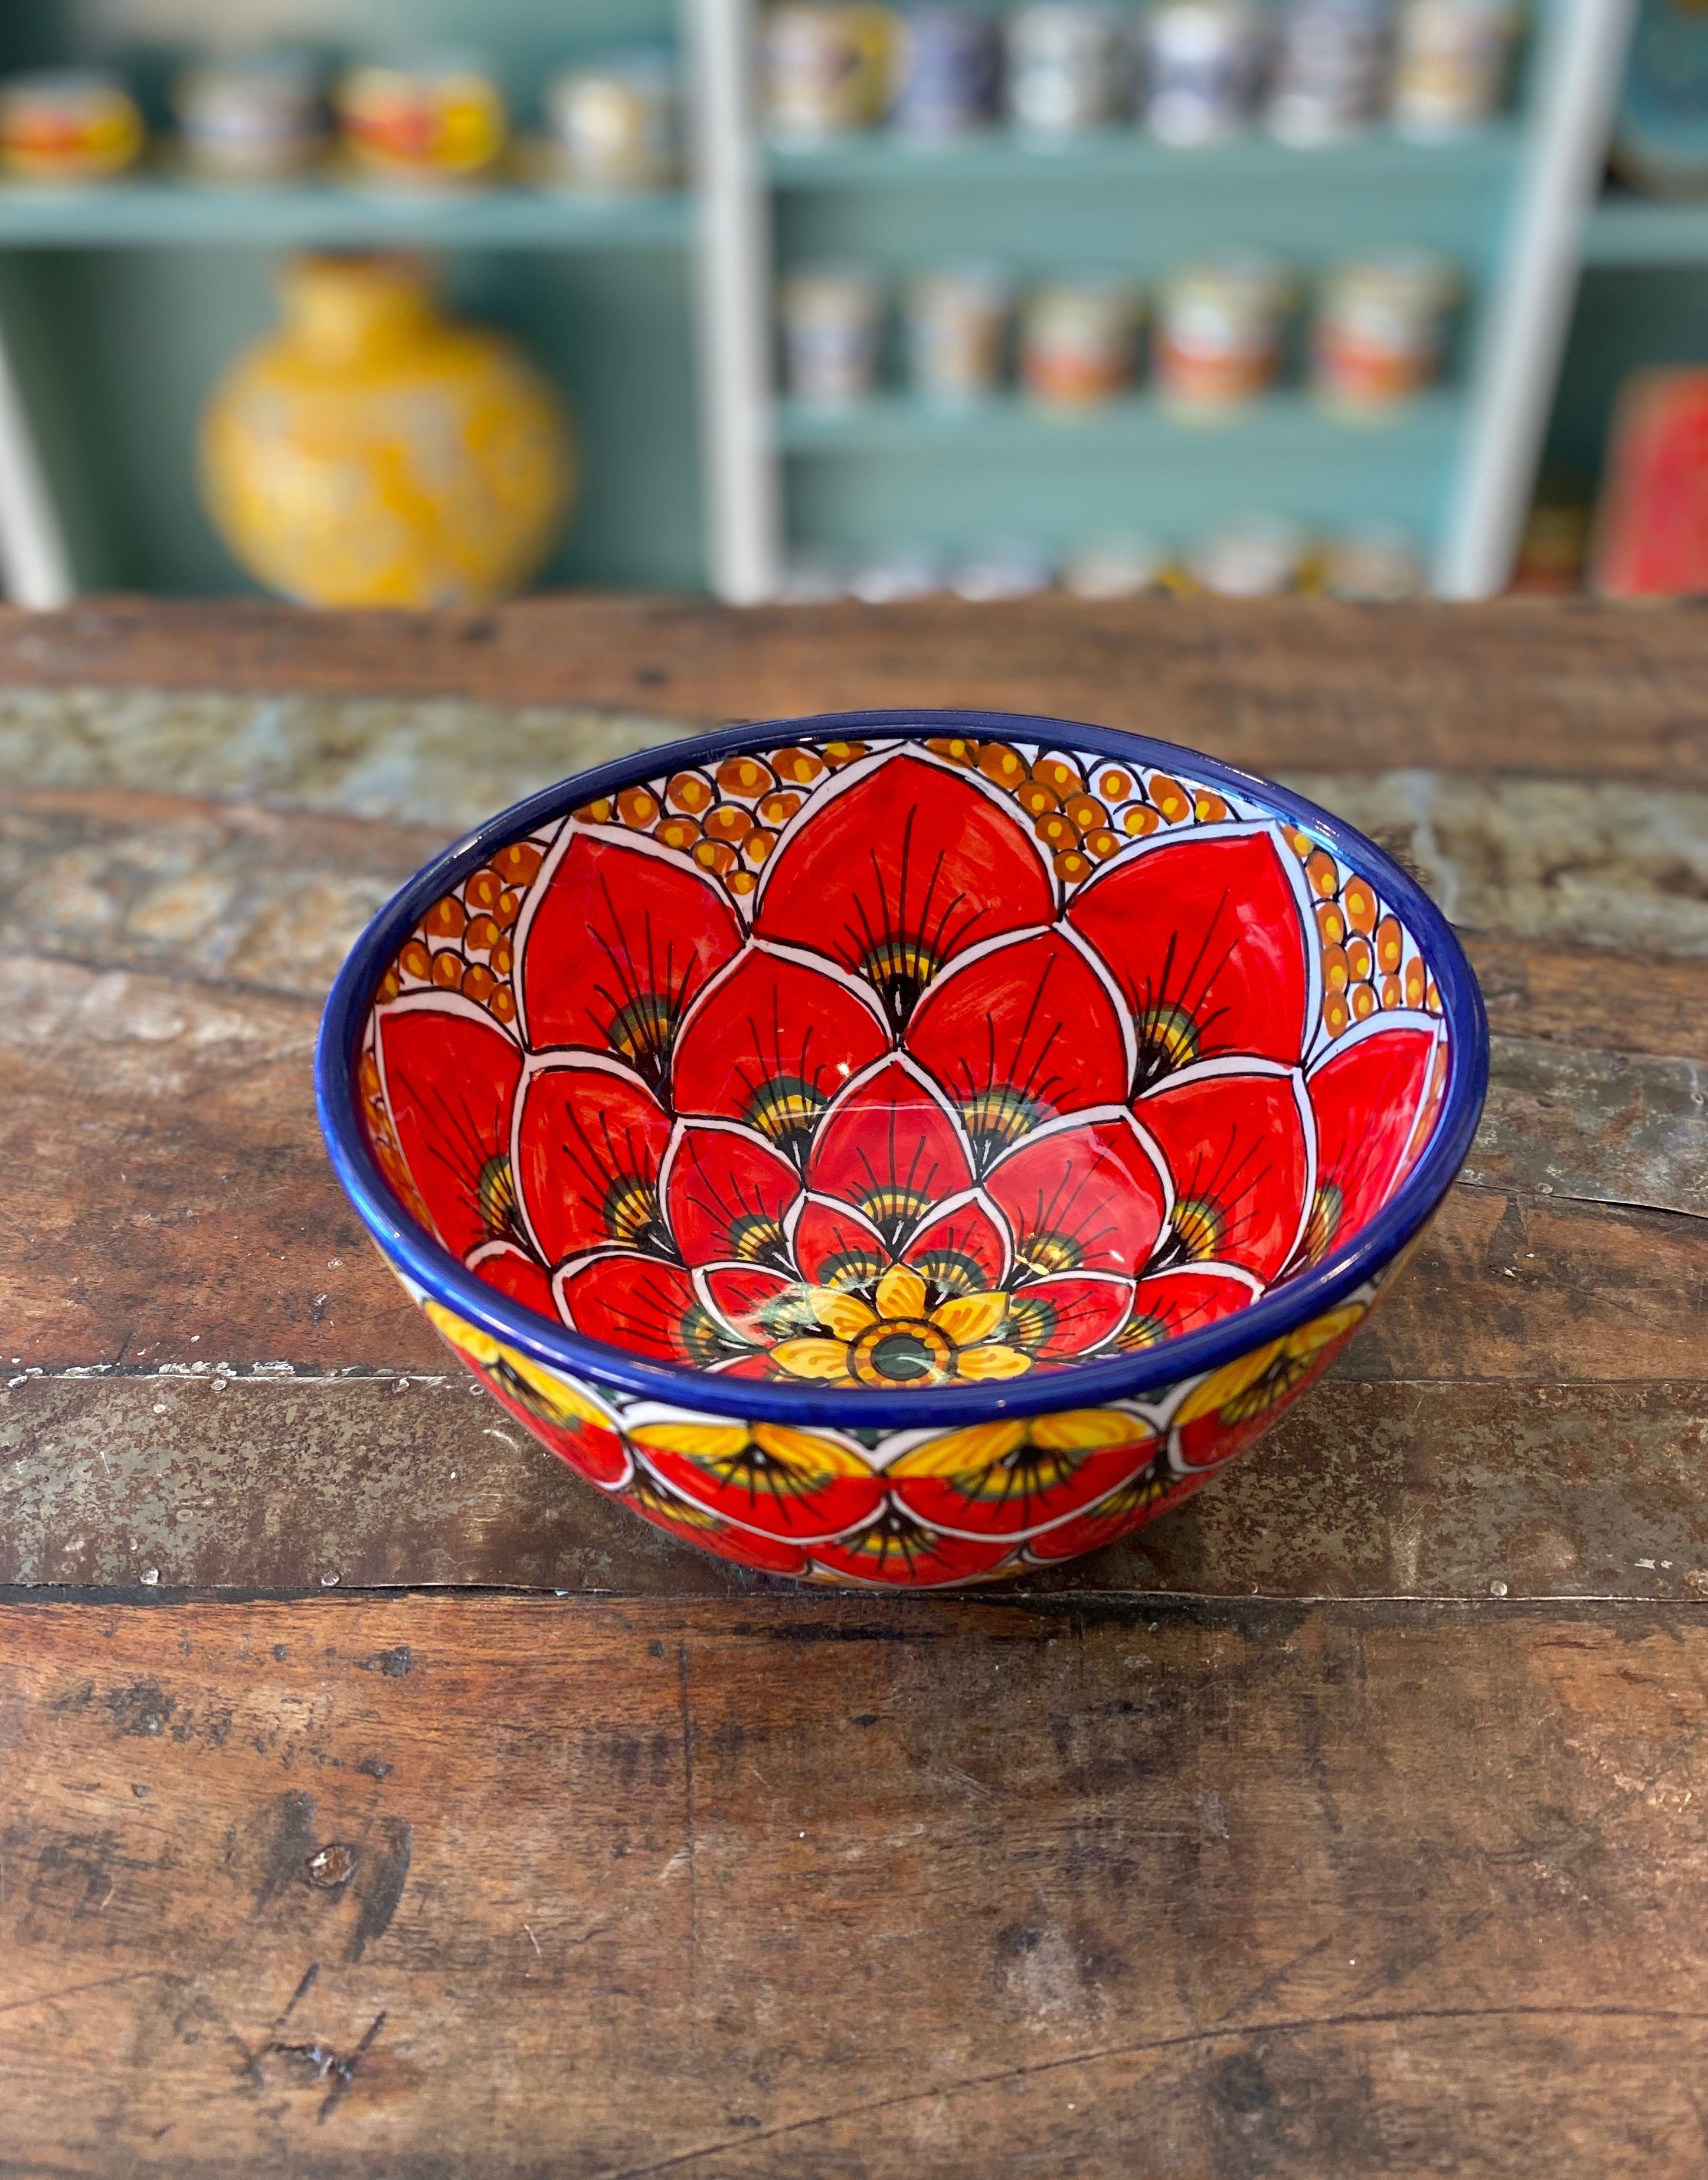 Geribi Cereal Bowl (PG04) Red Peacock Design, ceramics, pottery, italian design, majolica, handmade, handcrafted, handpainted, home decor, kitchen art, home goods, deruta, majolica, Artisan, treasures, traditional art, modern art, gift ideas, style, SF, shop small business, artists, shop online, landmark store, legacy, one of a kind, limited edition, gift guide, gift shop, retail shop, decorations, shopping, italy, home staging, home decorating, home interiors